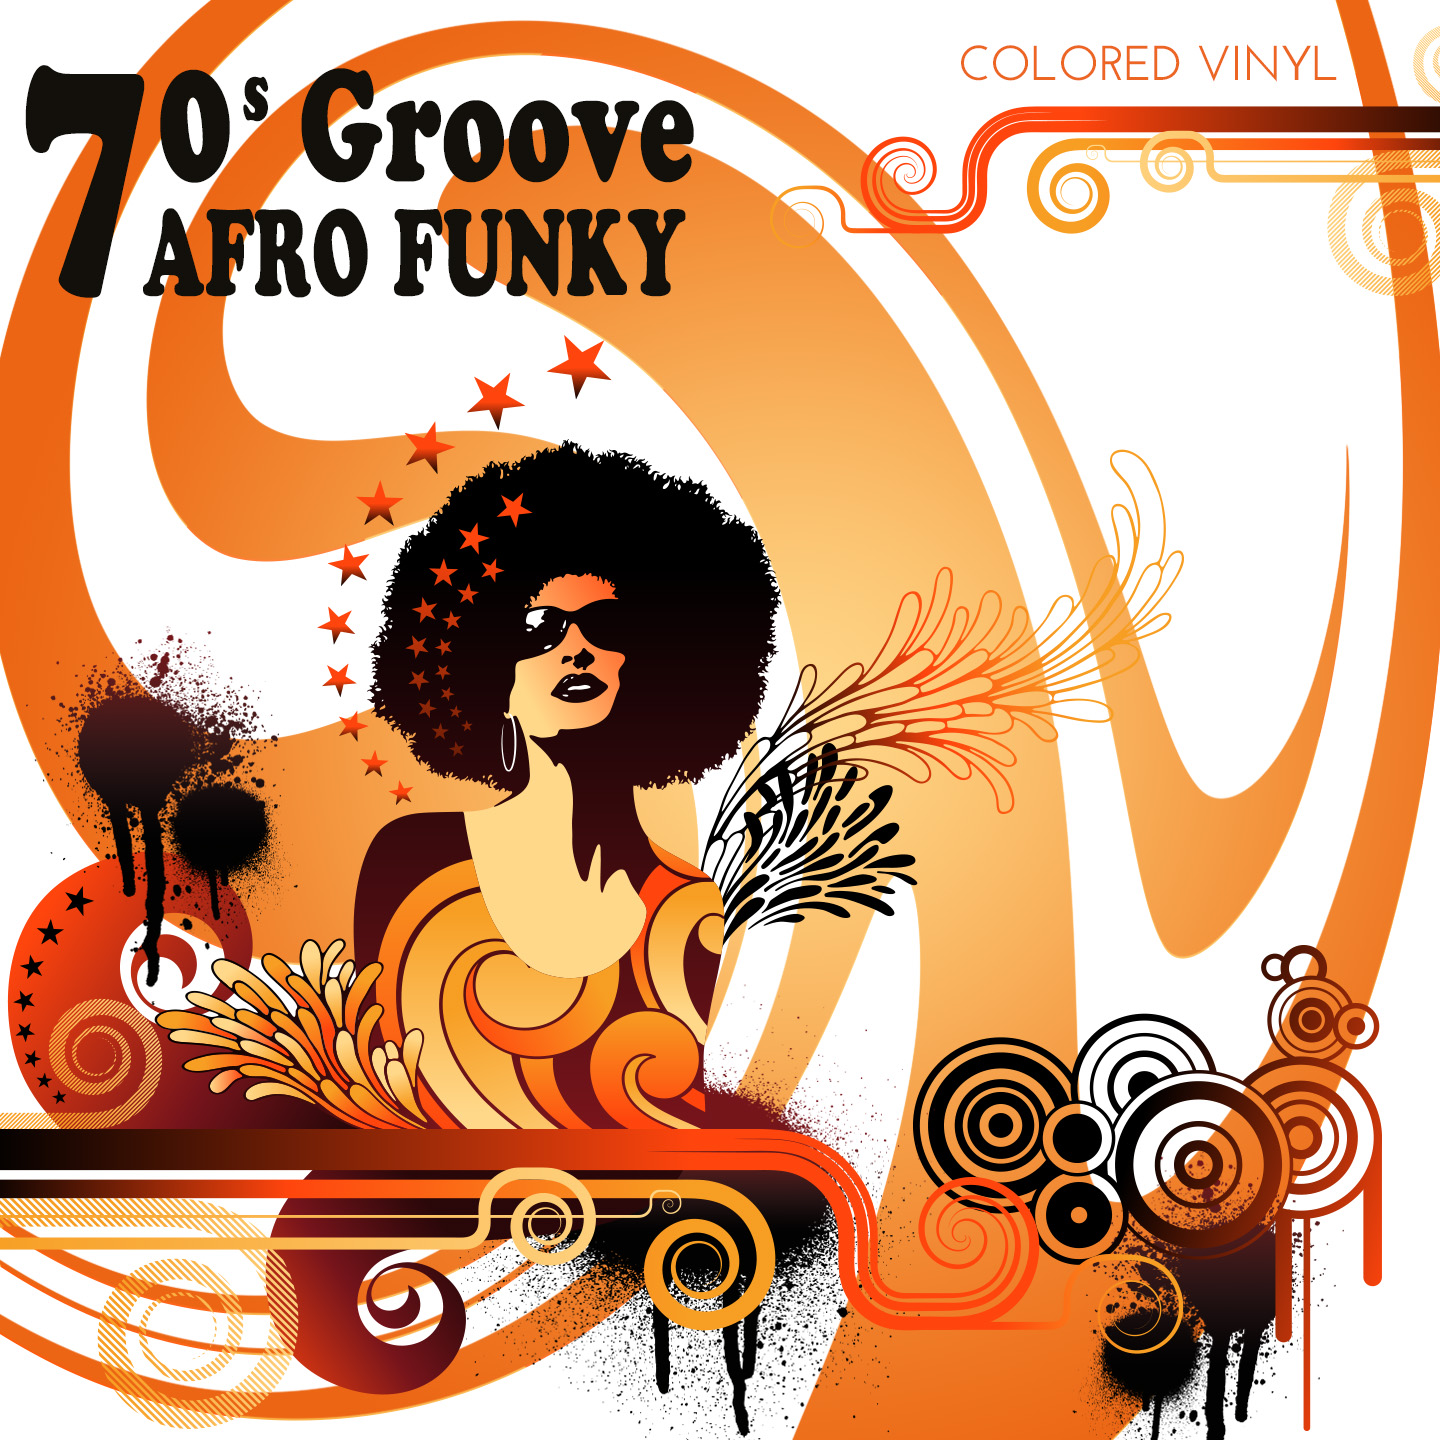 Afro Funky 70s Groove